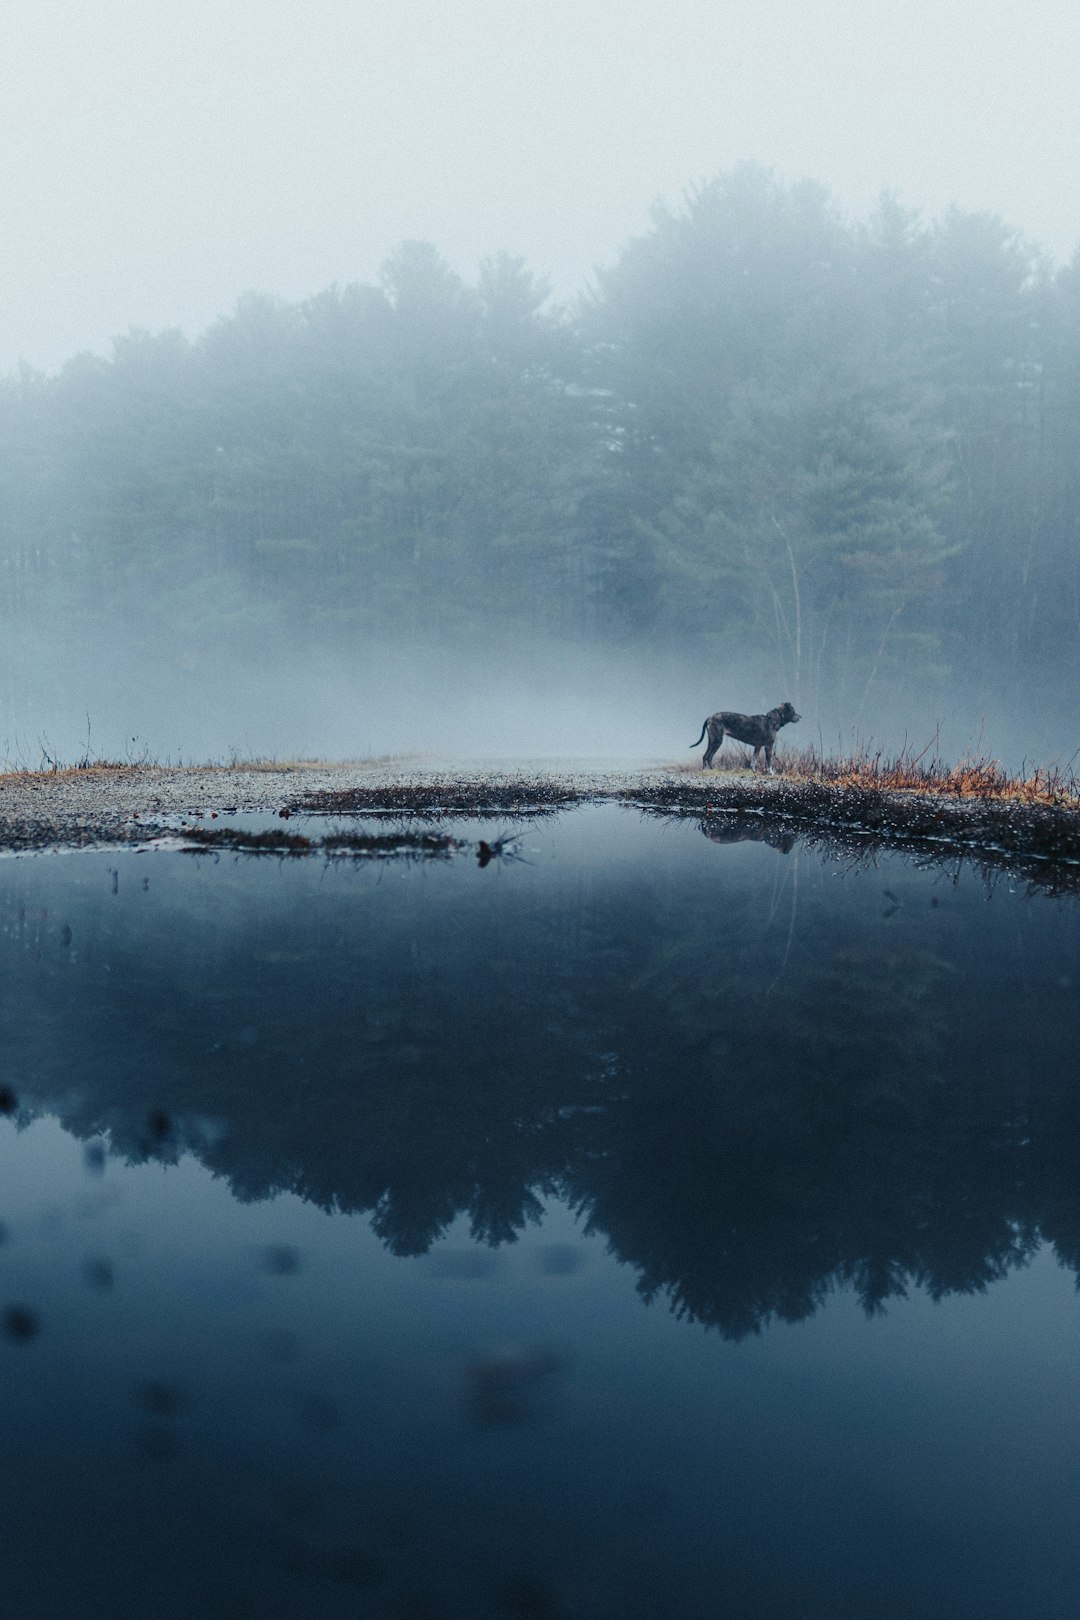 a horse is standing in the middle of a lake